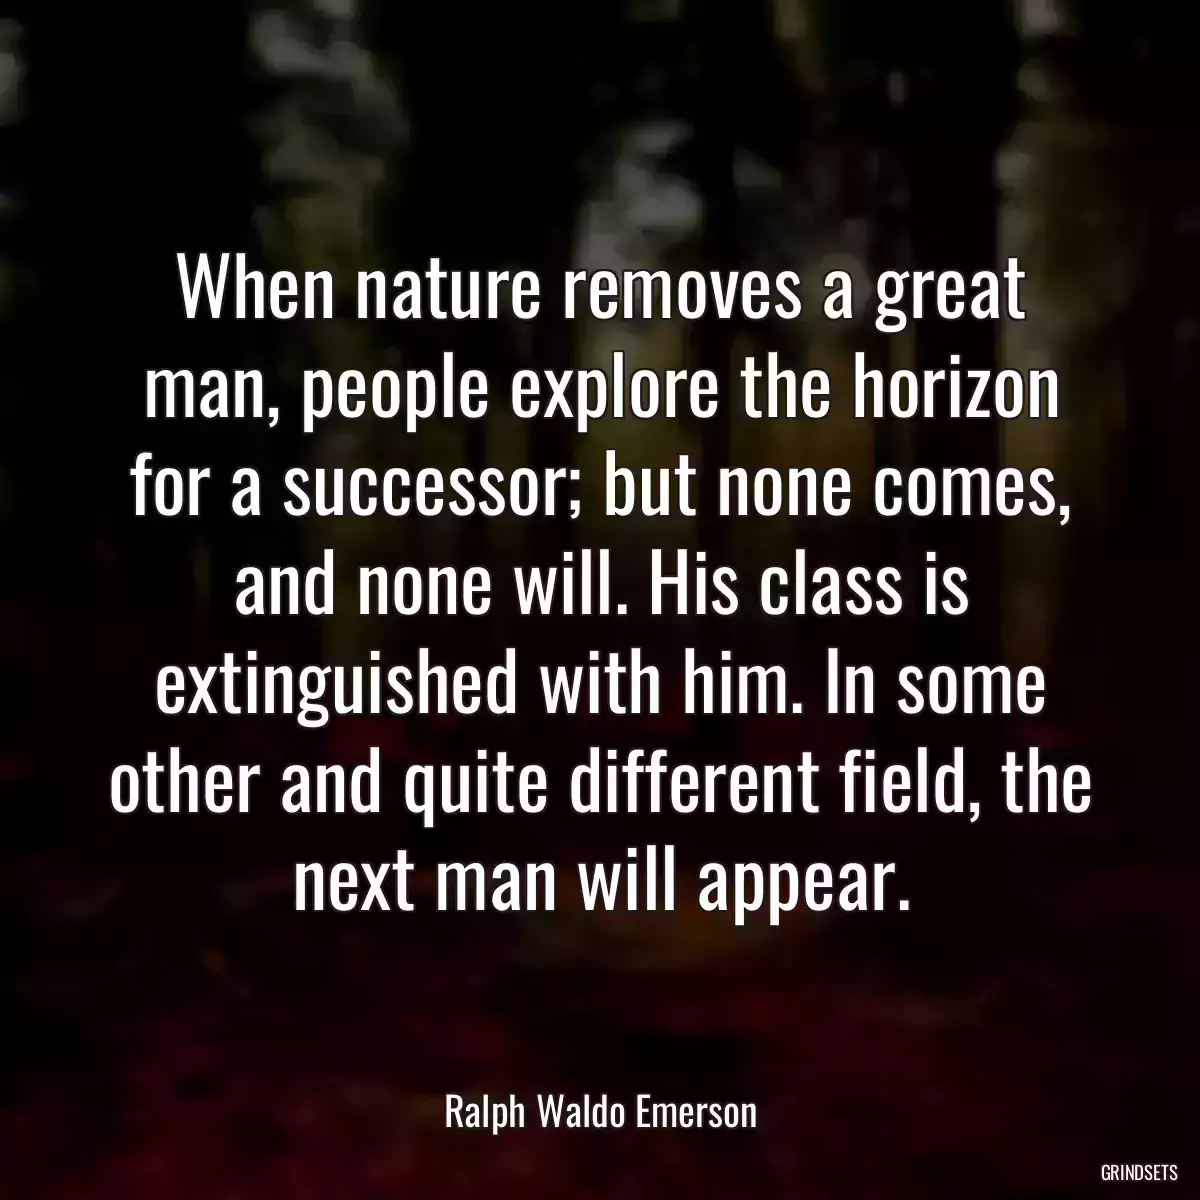 When nature removes a great man, people explore the horizon for a successor; but none comes, and none will. His class is extinguished with him. In some other and quite different field, the next man will appear.